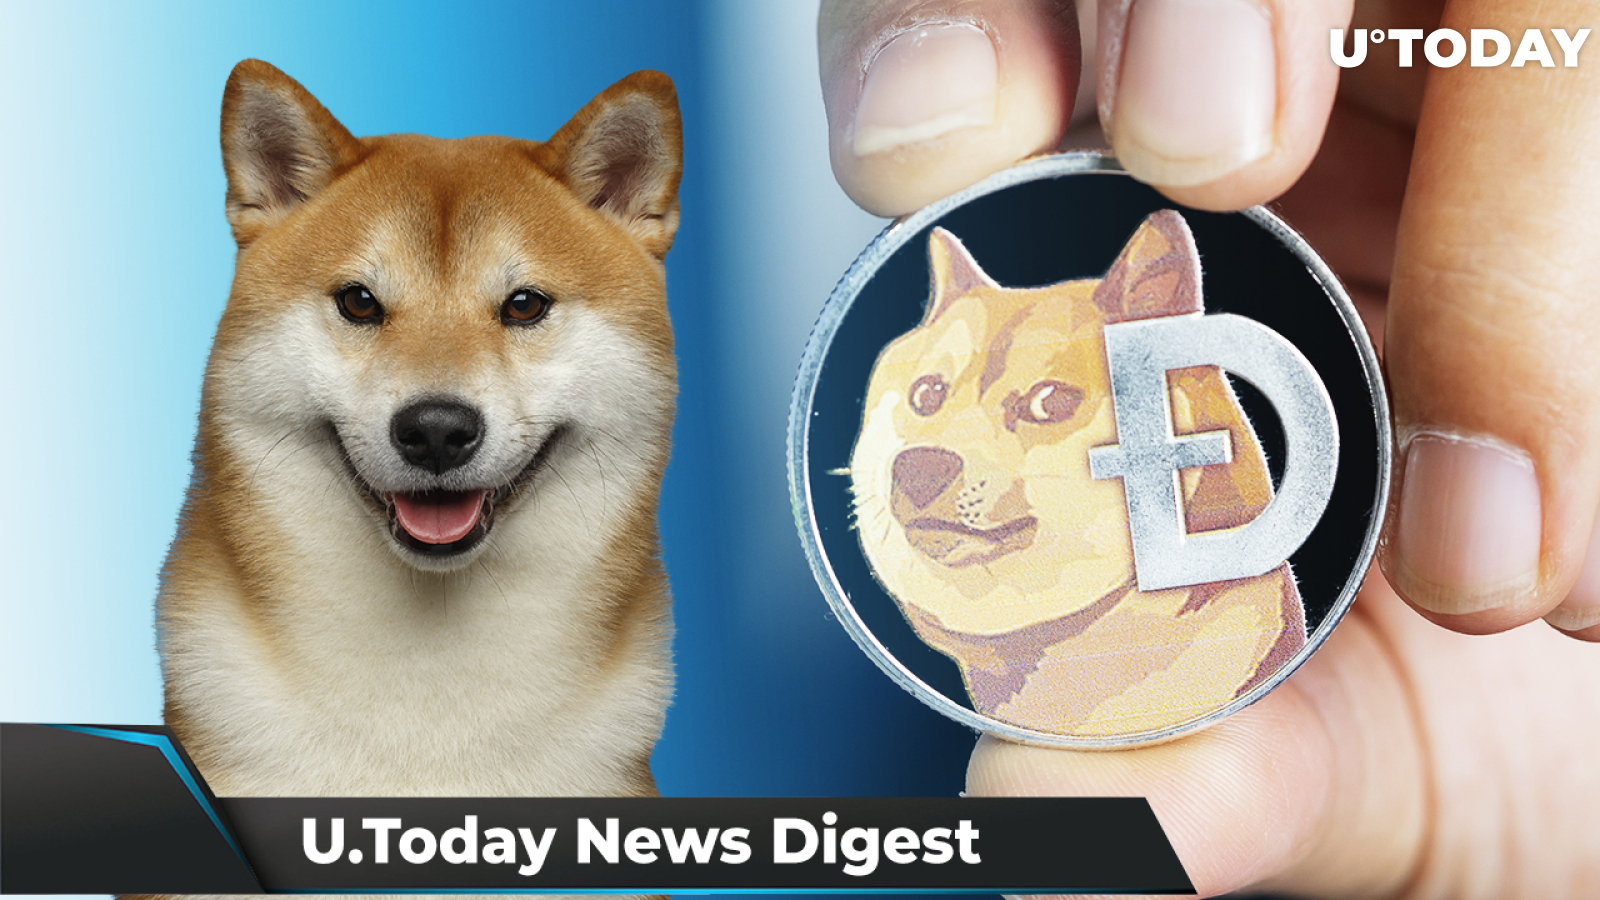 Elon Musk Pushes DOGE Price up Yet Again, Record 1.3 Billion SHIB Burned, XRP Case Timeline of Events Shared: Crypto News Digest by U.Today